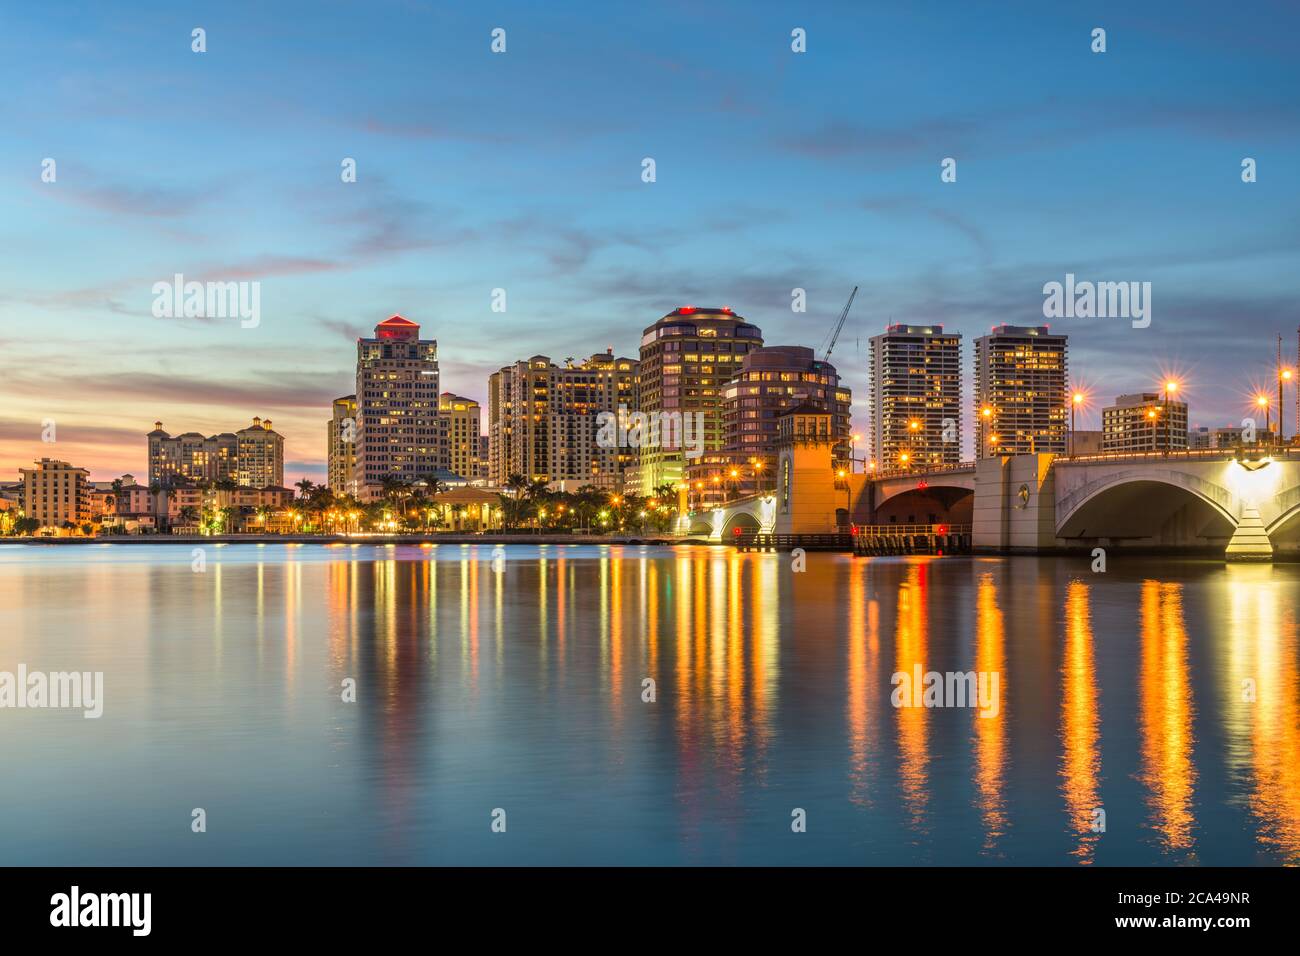 West Palm Beach, Florida, USA downtown skyline on the Intracoastal Waterway at dusk. Stock Photo